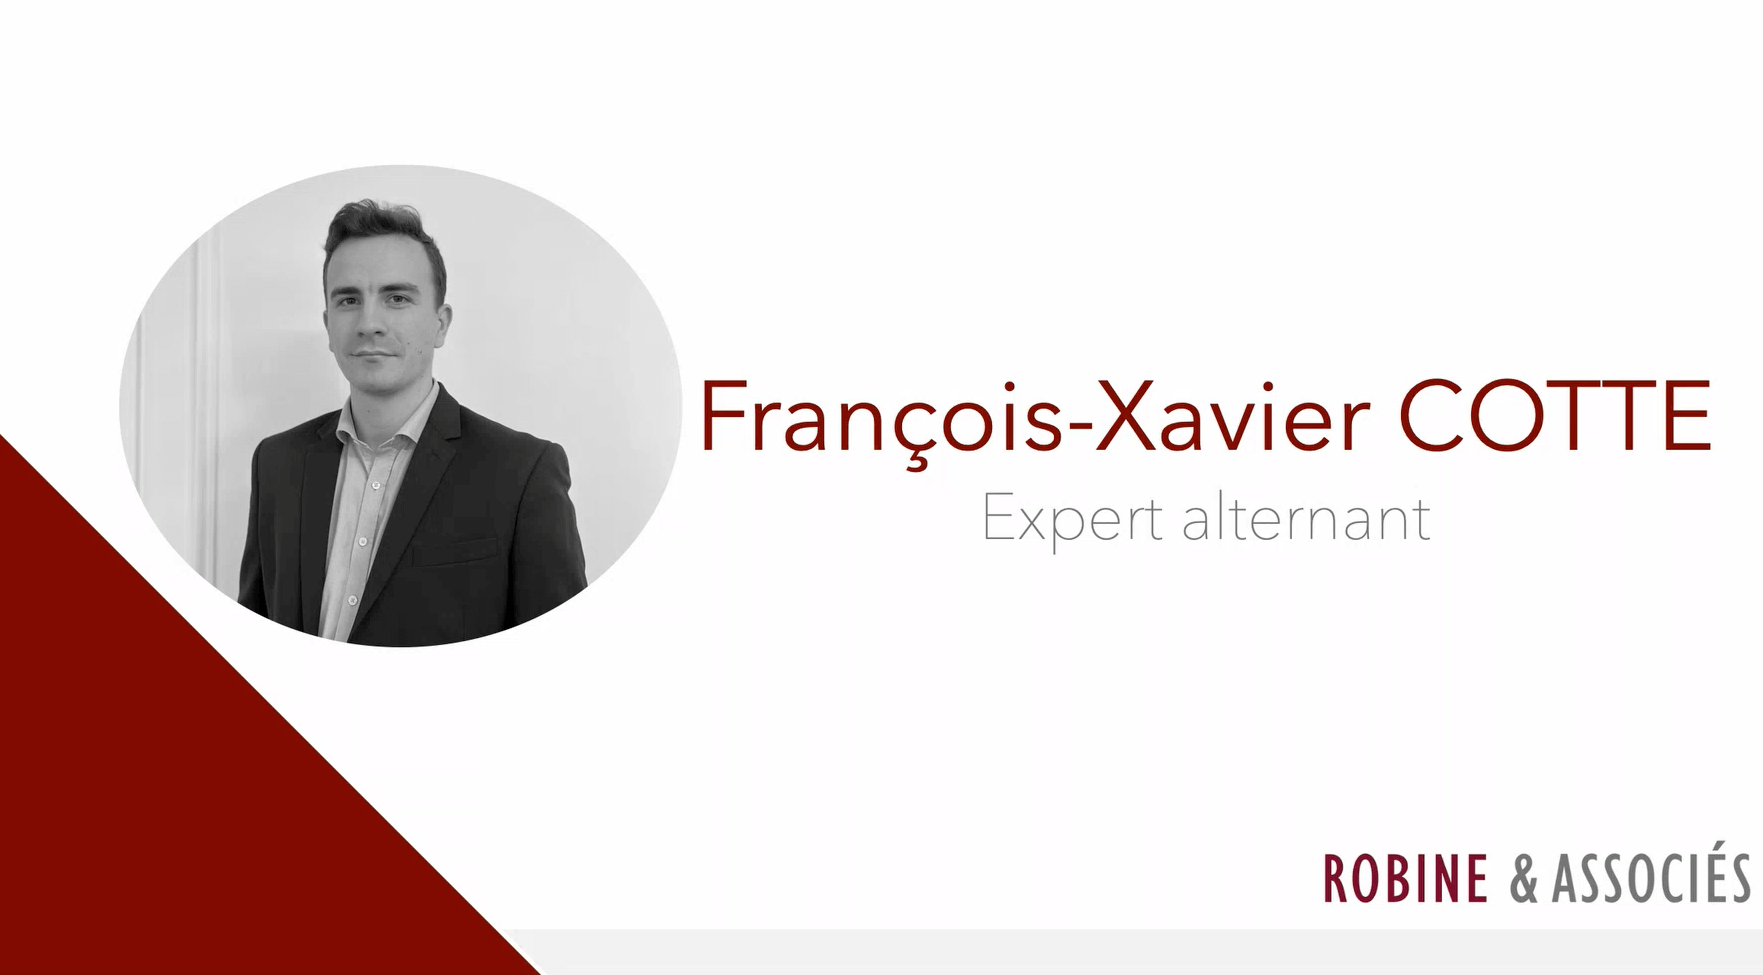 Fast and curious – François-Xavier COTTE